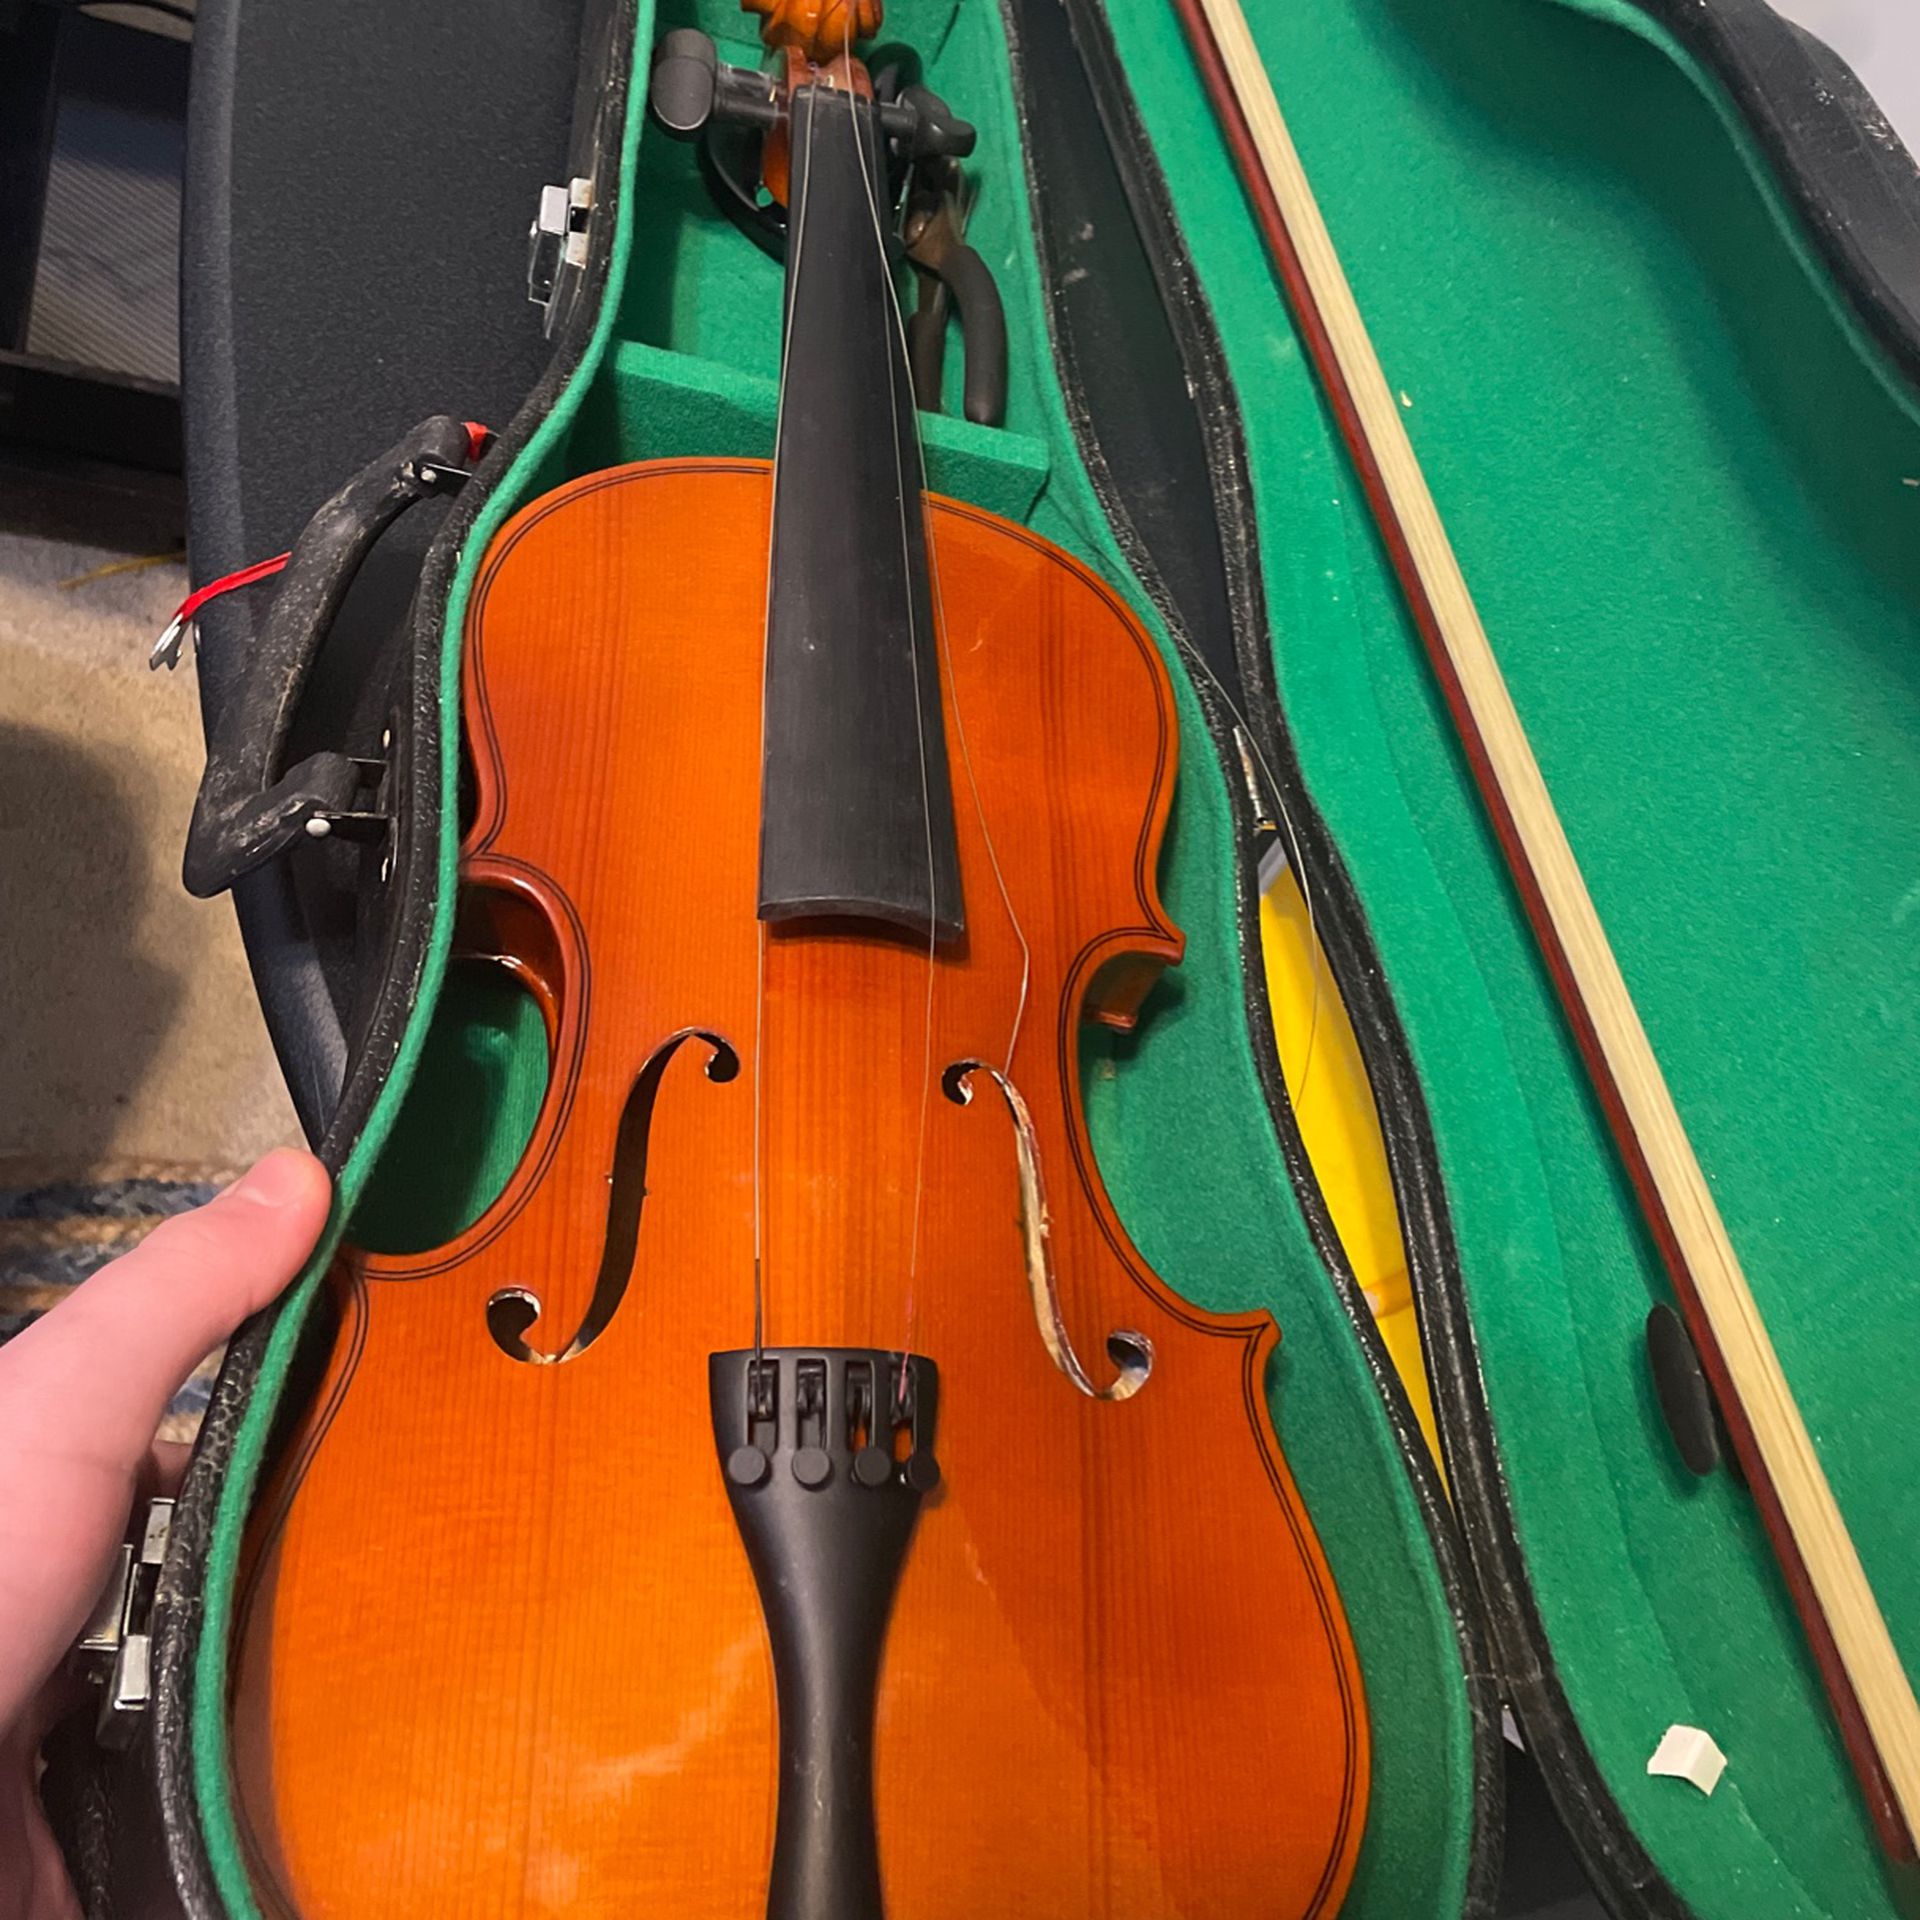 Violin Great Condition Just Needs To Be Restrung